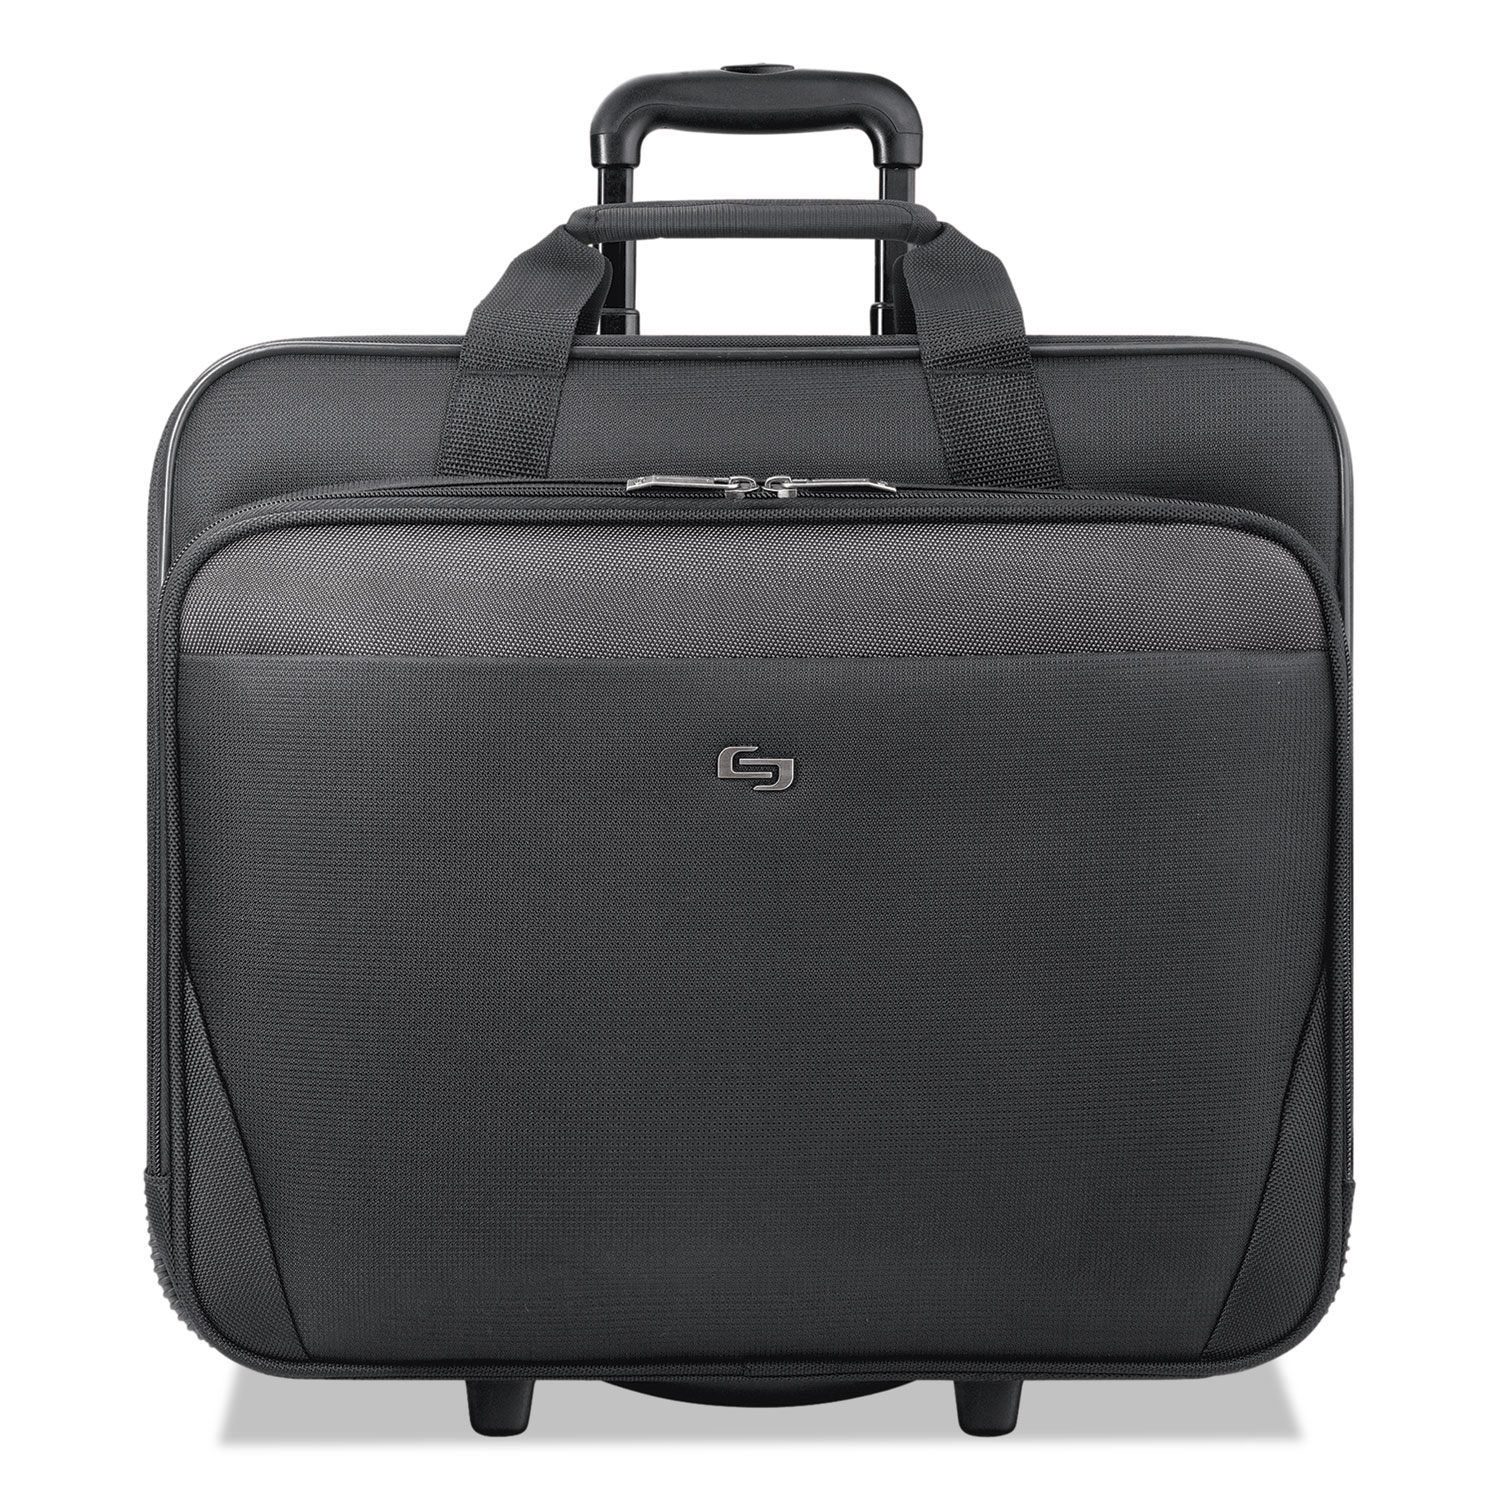 SOLO Classic Rolling Case, 17.3", 16 3/4" x 7" x 14 19/50", Black (CLS9104) - image 1 of 9